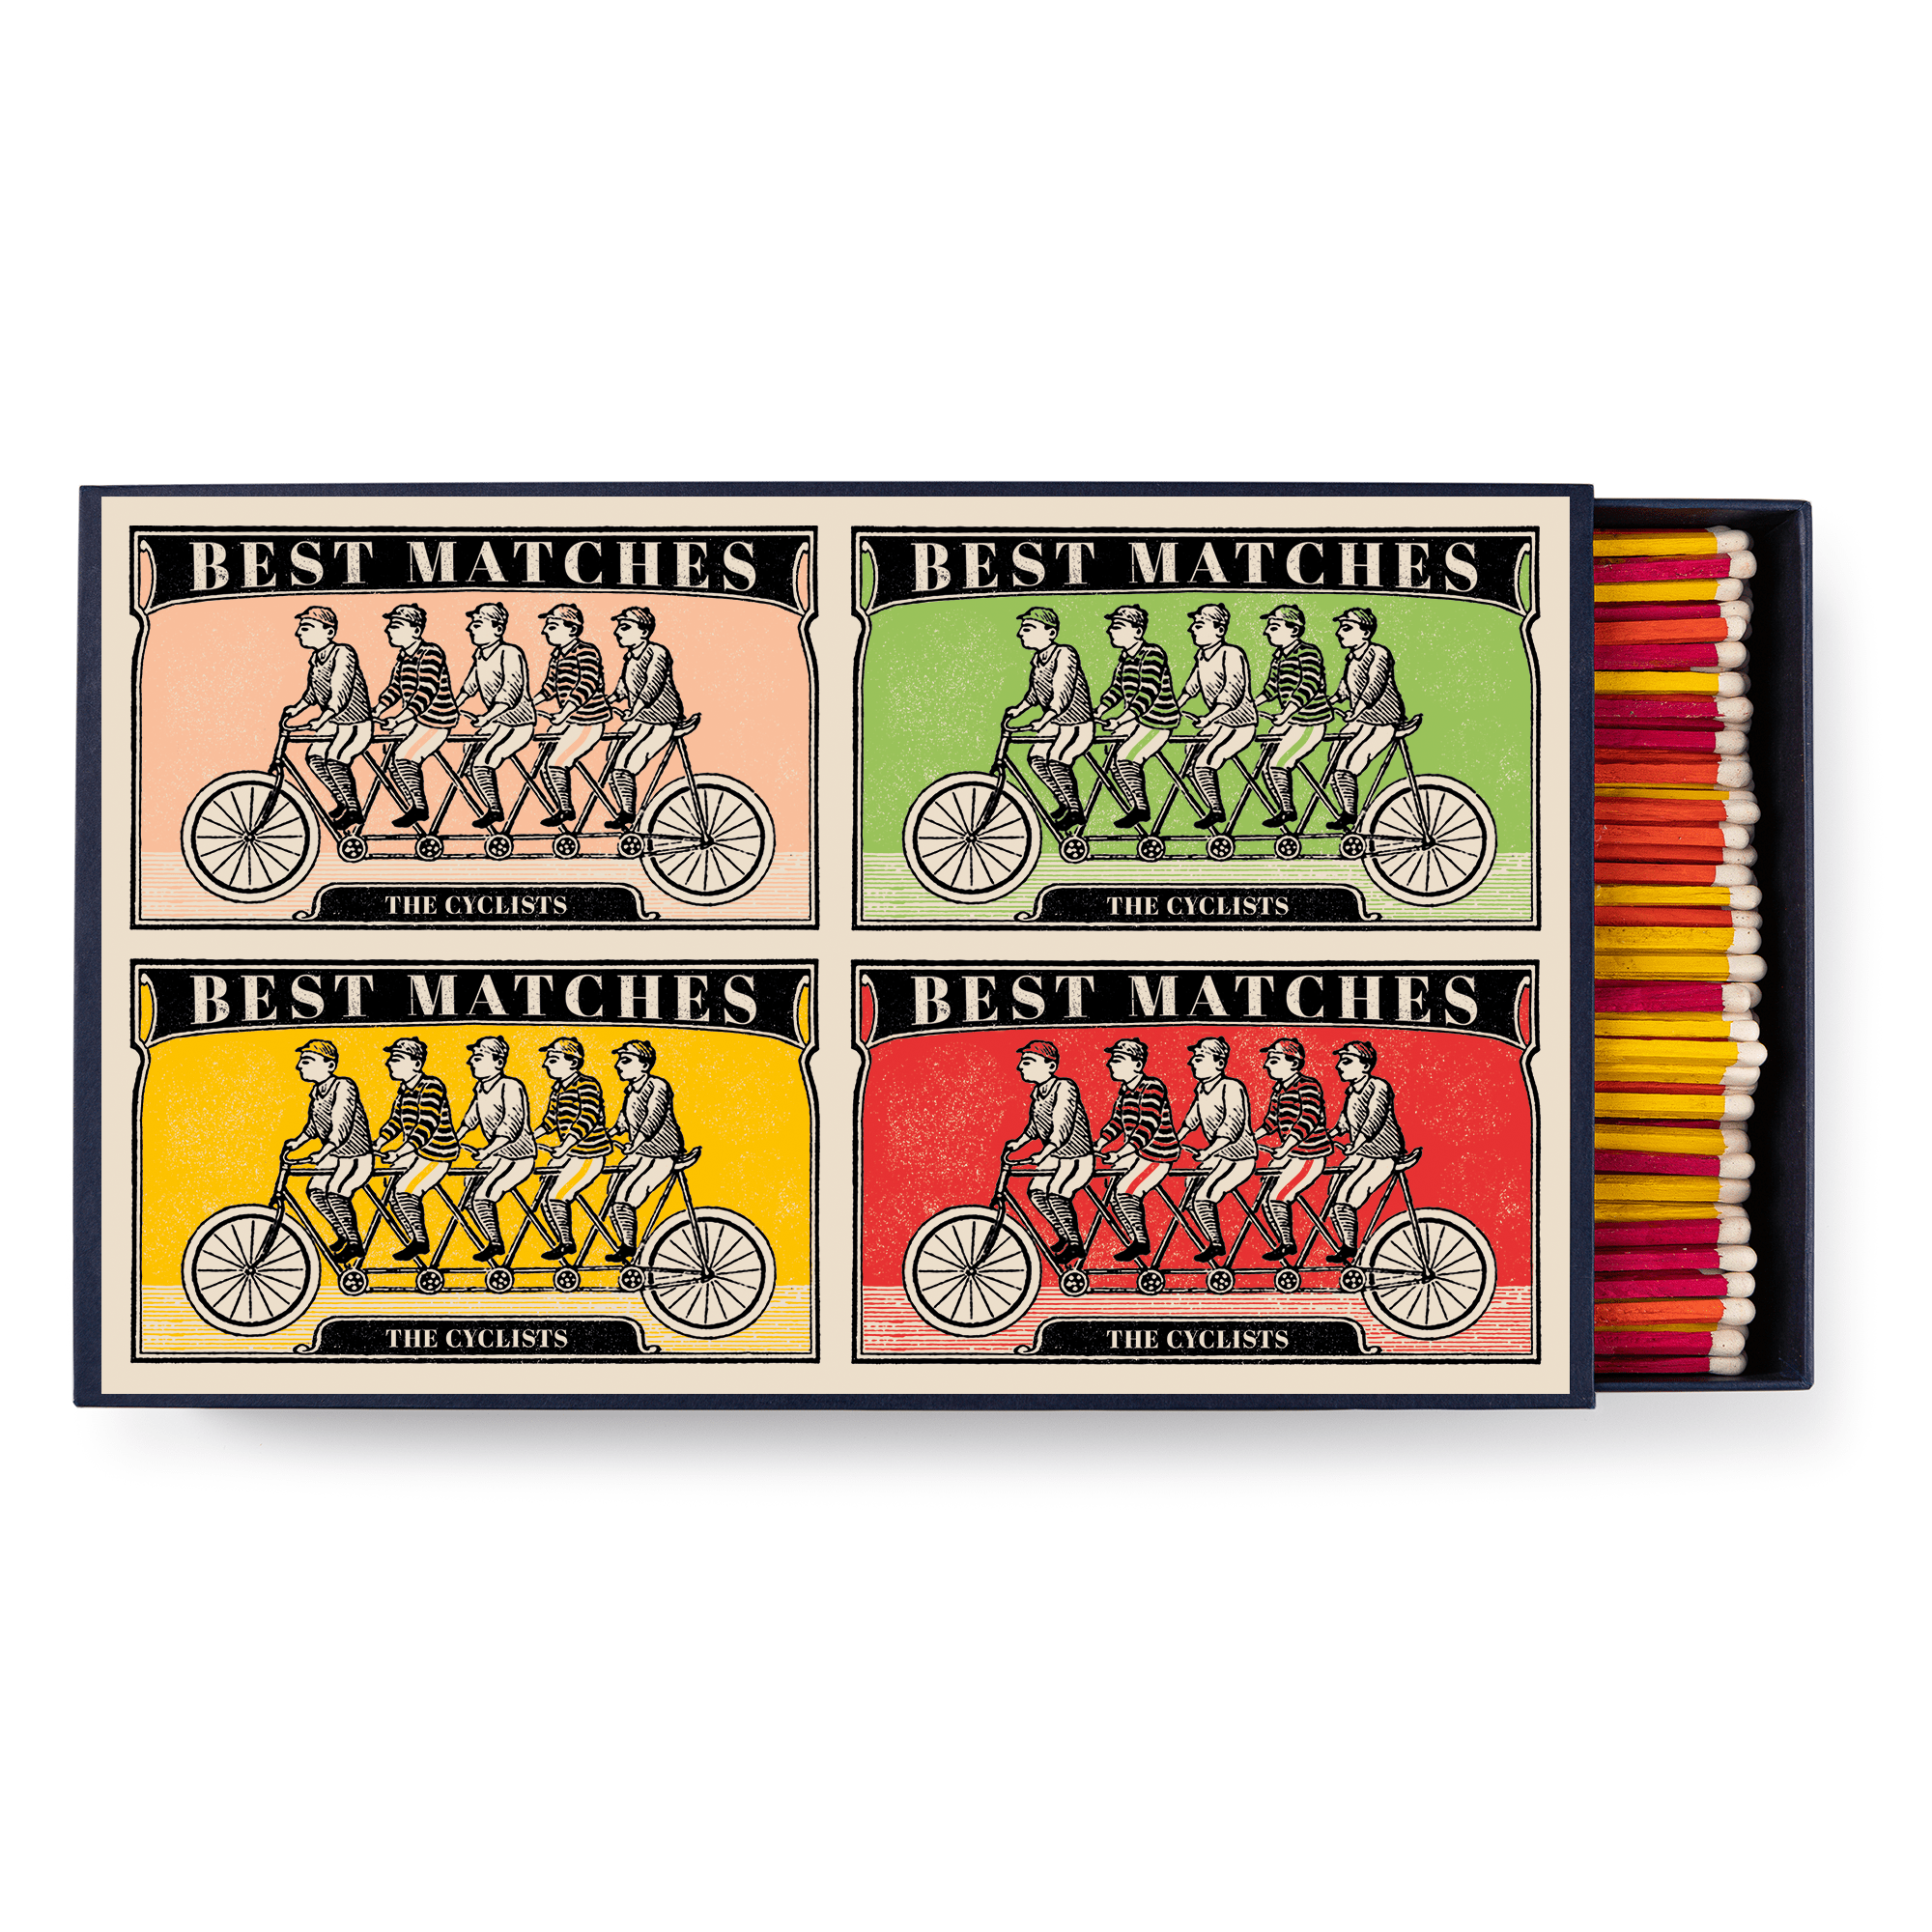 Luxury Giant Matches - The Cyclists - Life of Riley